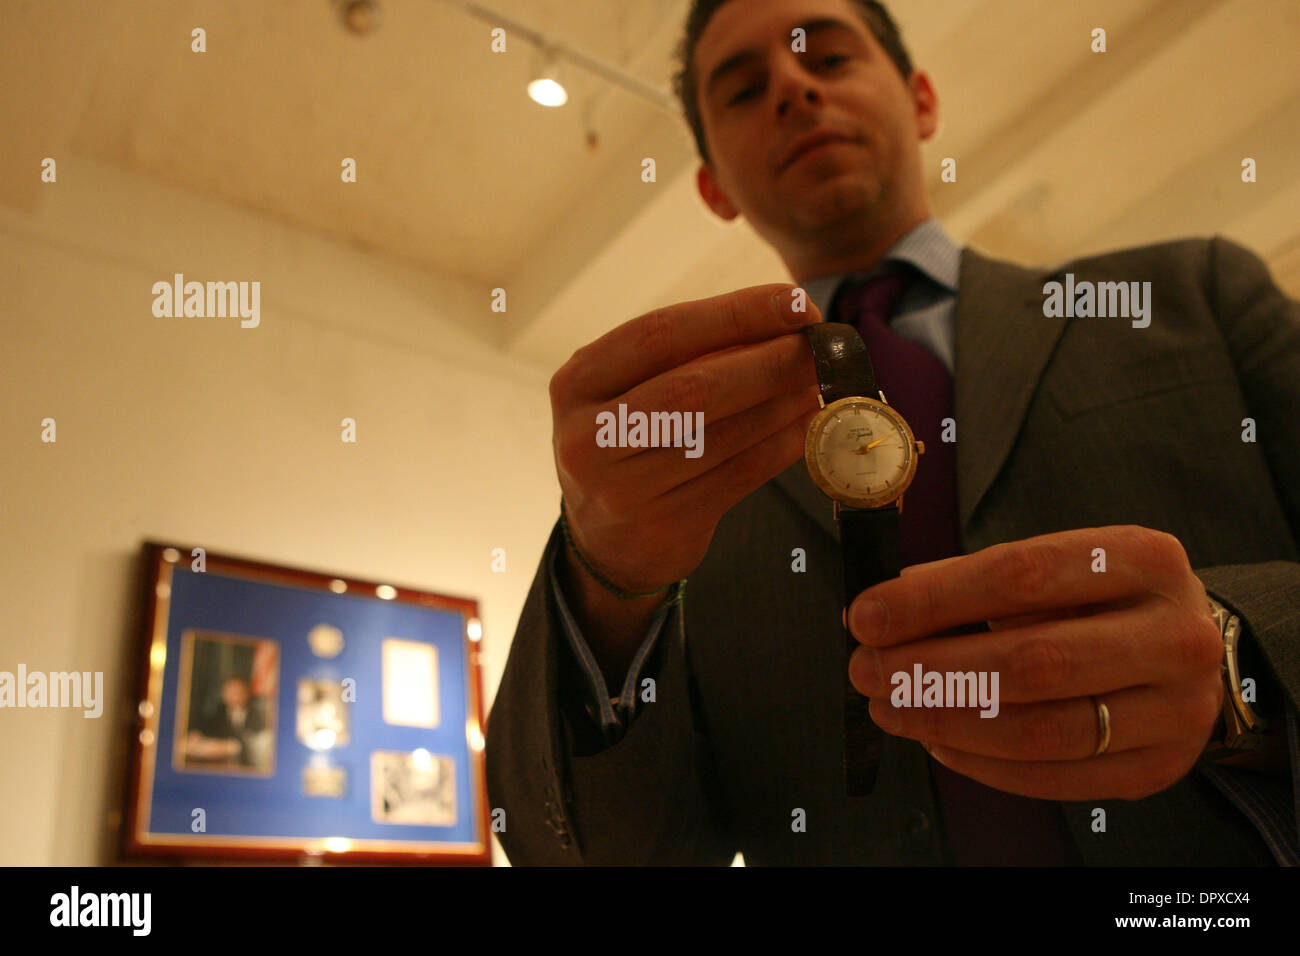 Mar 02, 2009 - New York, New York, USA - JULIEN SCHAERER, Director of Watch Department of Antiquorum Auctioneers, showing the Kennedy-Onassis watch. The Nastrix watch that belonged to John F. Kennedy, the 35th. President of the US, and later to Aristotle Onassis. The Kennedy-Onassis watch, Gandhi's pocket watch and a Giuseppe Bonanno watch are being auctioned this week at the Antiq Stock Photo